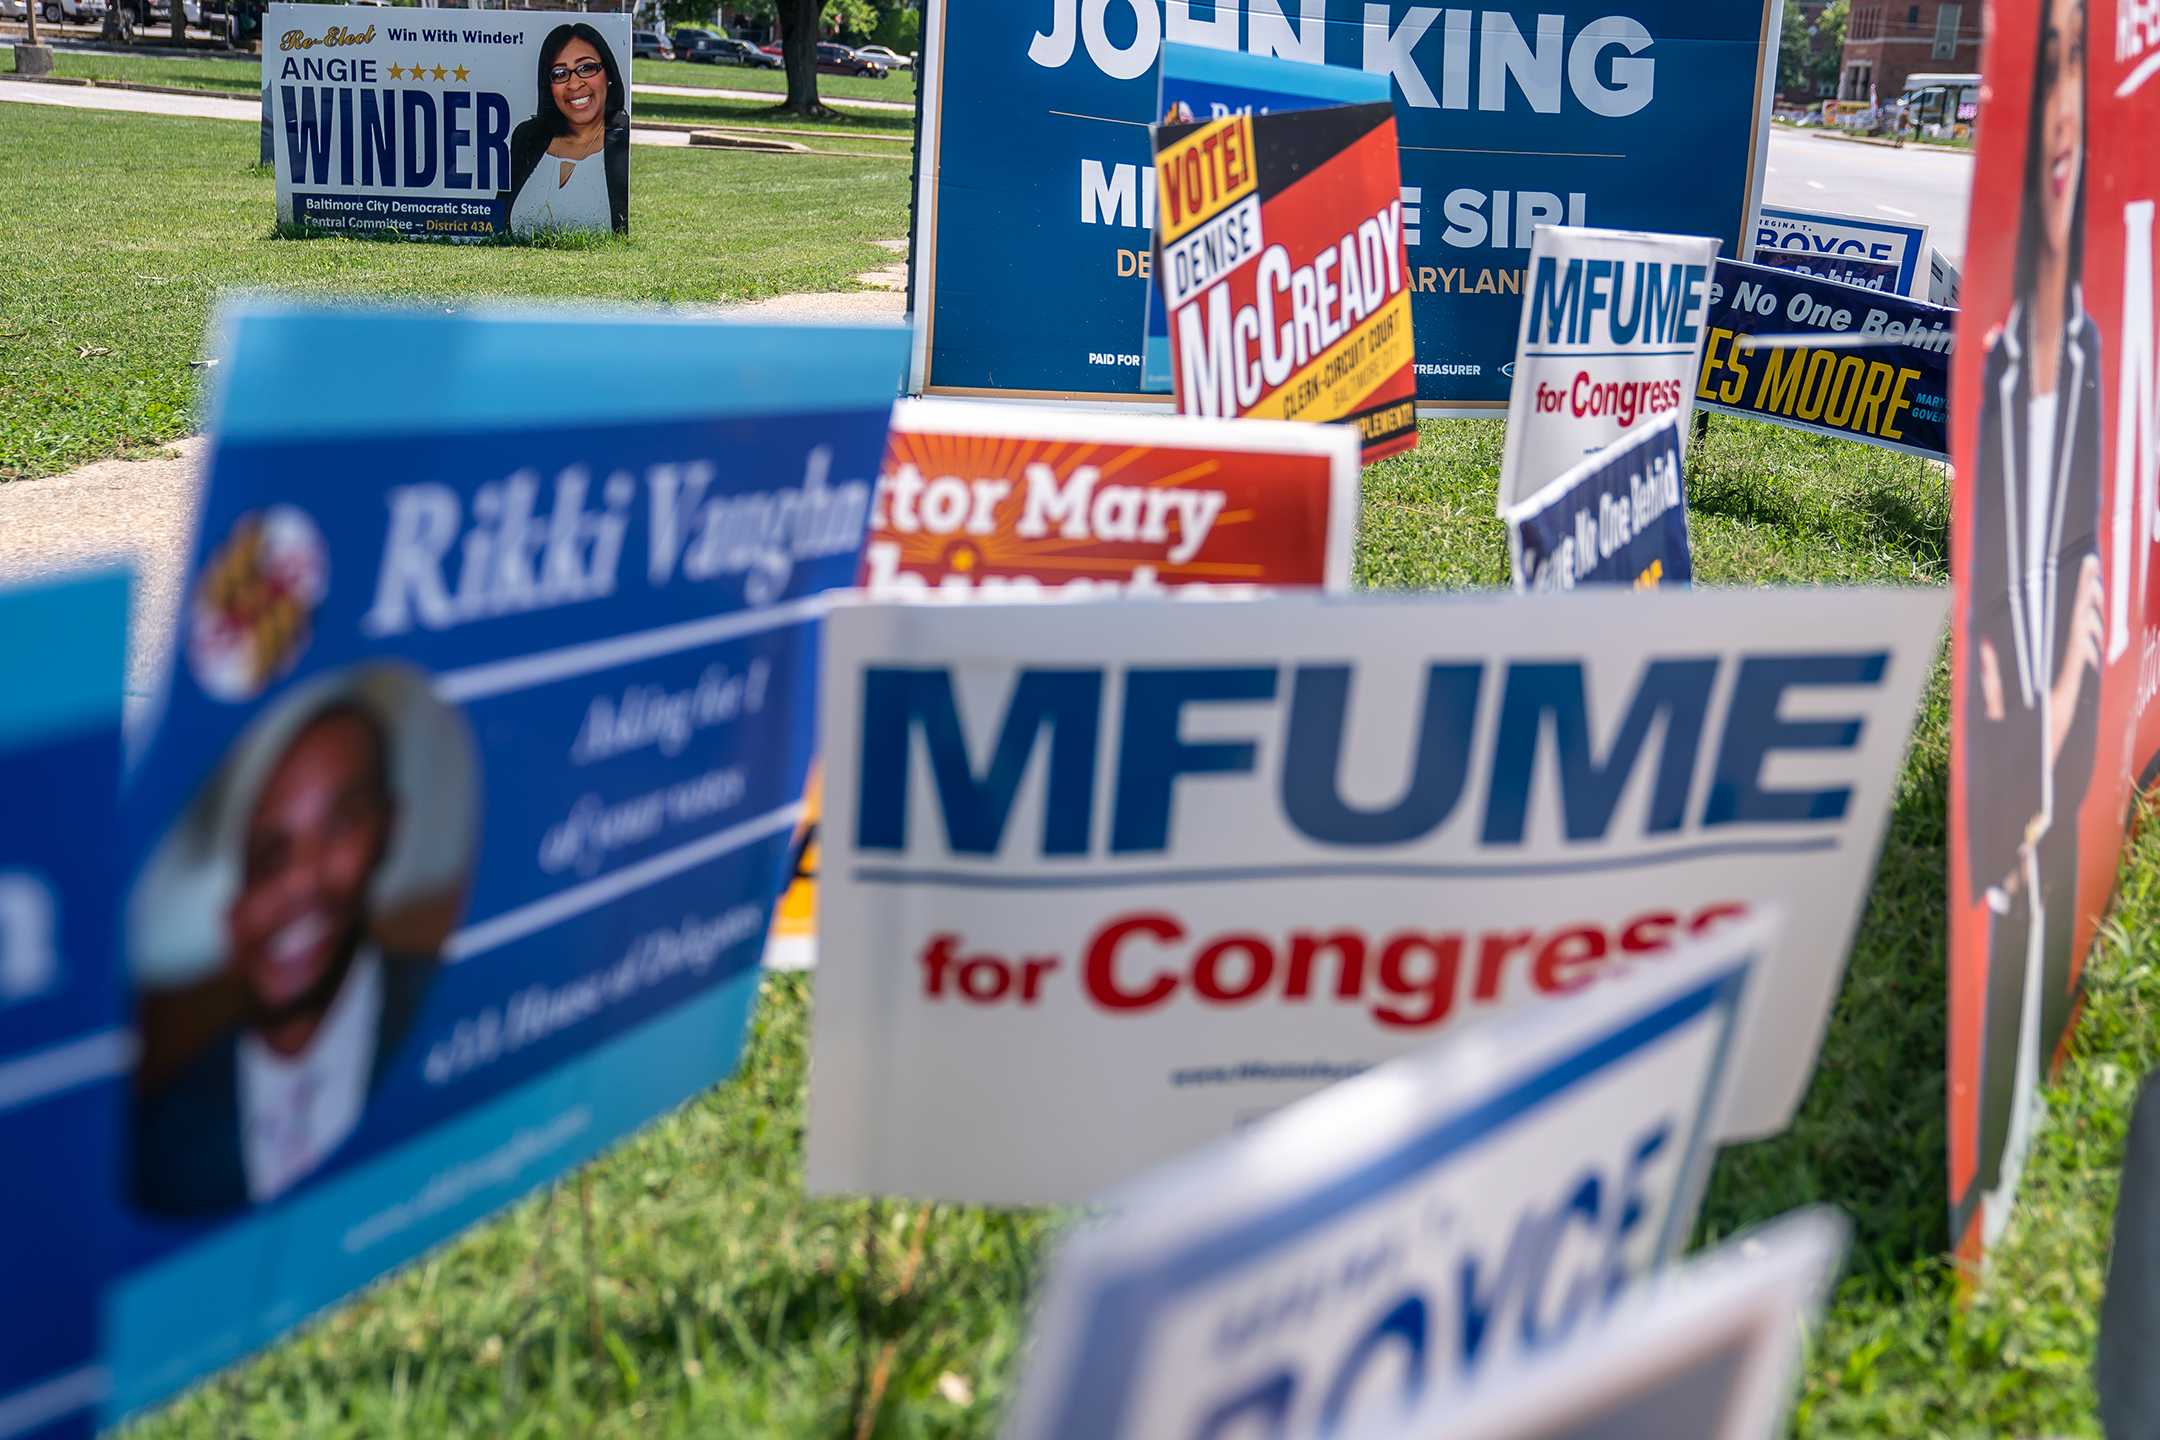 Photograph of a sea of political signs in a grassy area